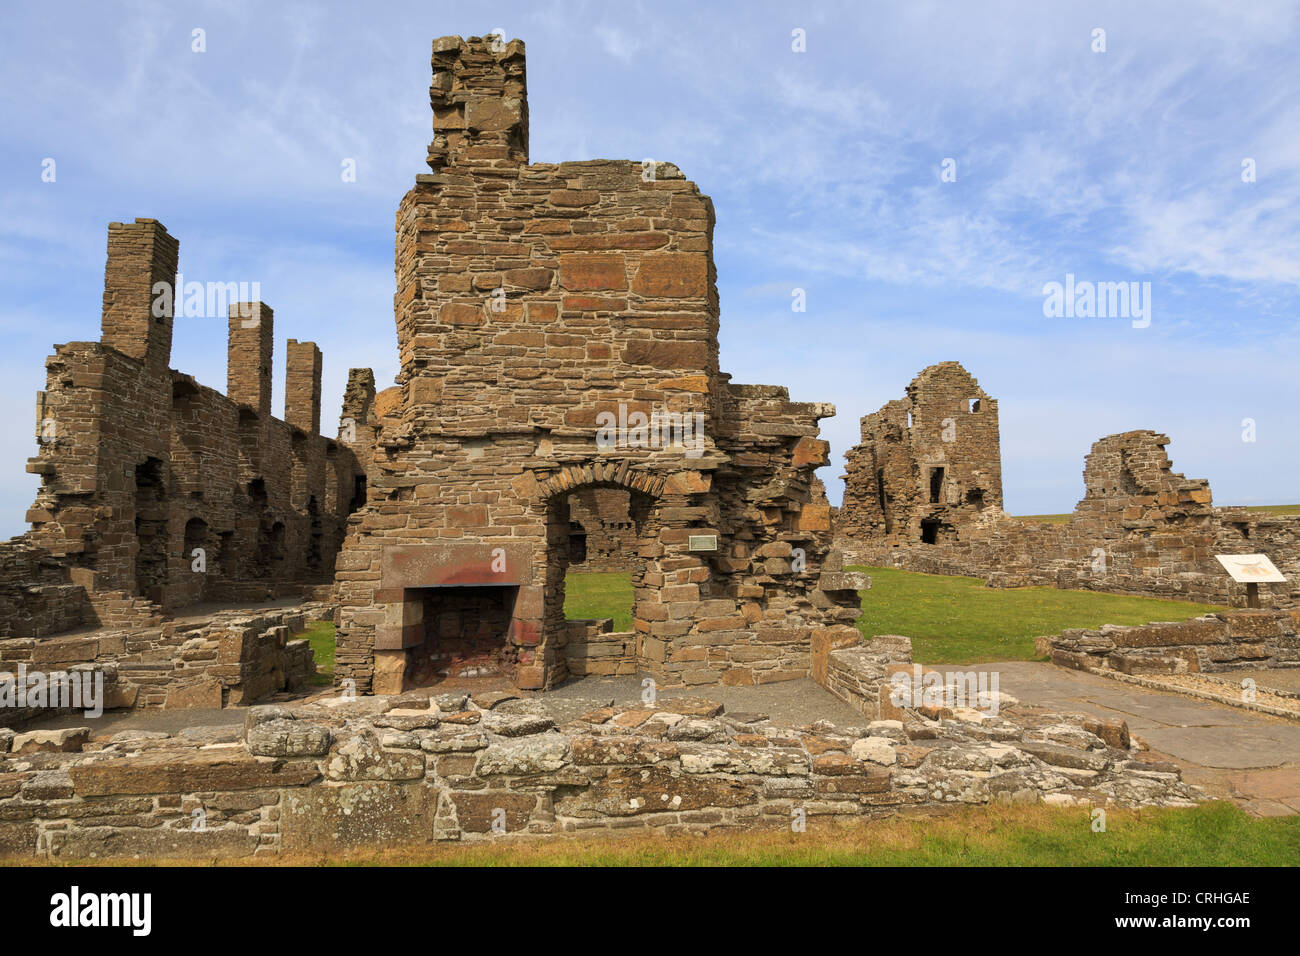 Ruined remains of 16th century Earl's Palace built by Lord Robert Stewart. Birsay Orkney Islands Scotland UK Stock Photo